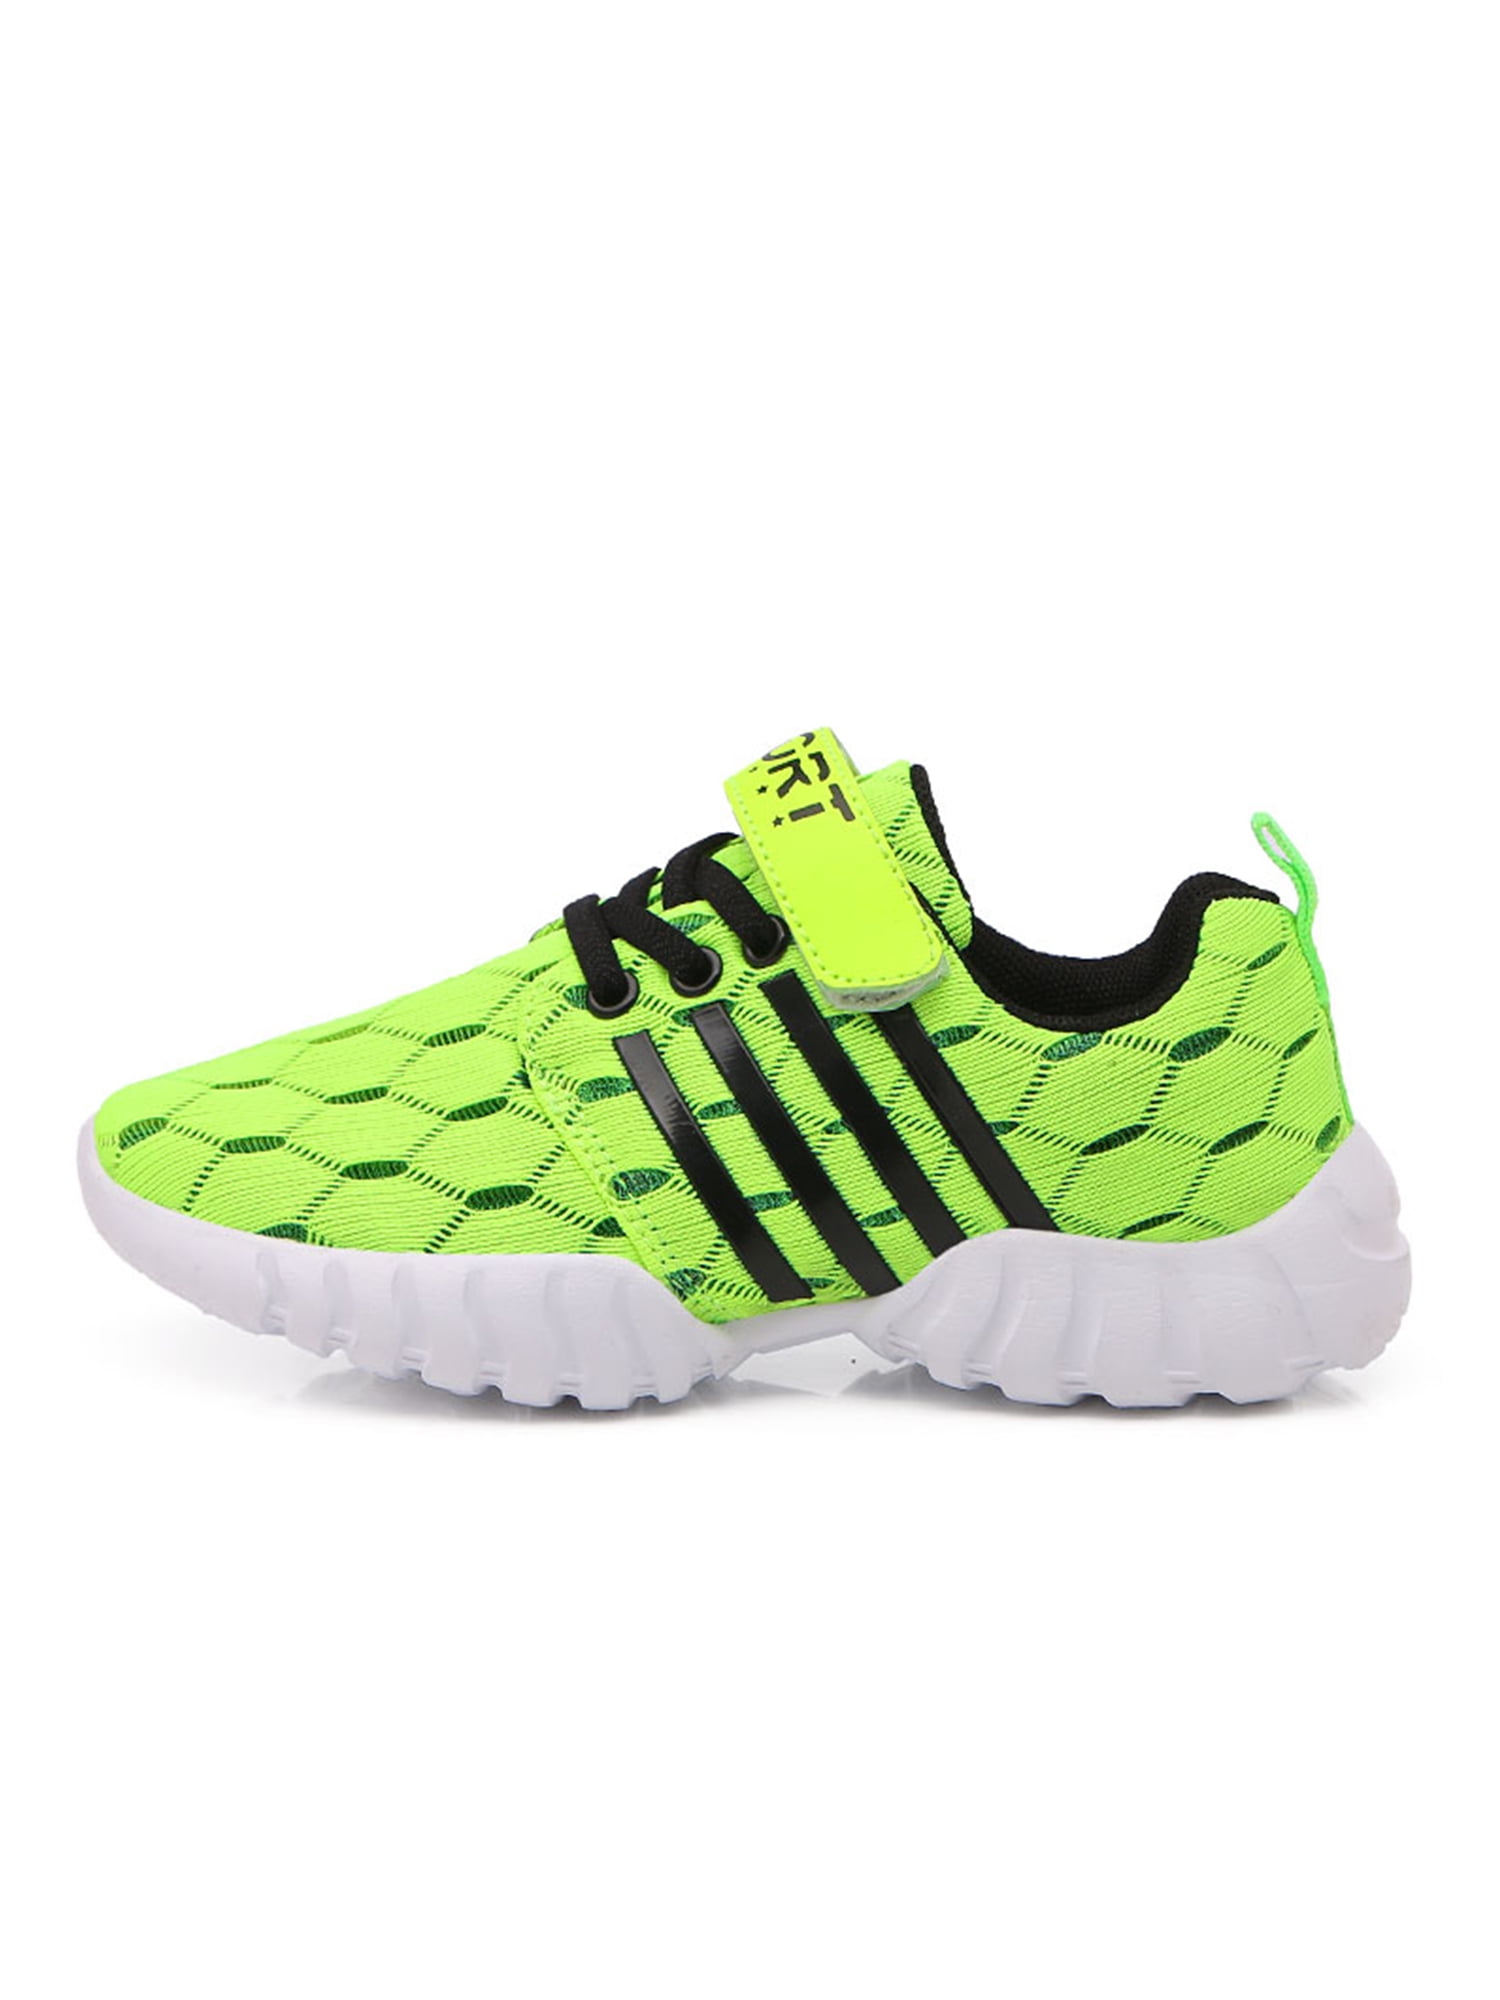 Kids Tennis Shoes Breathable Running 